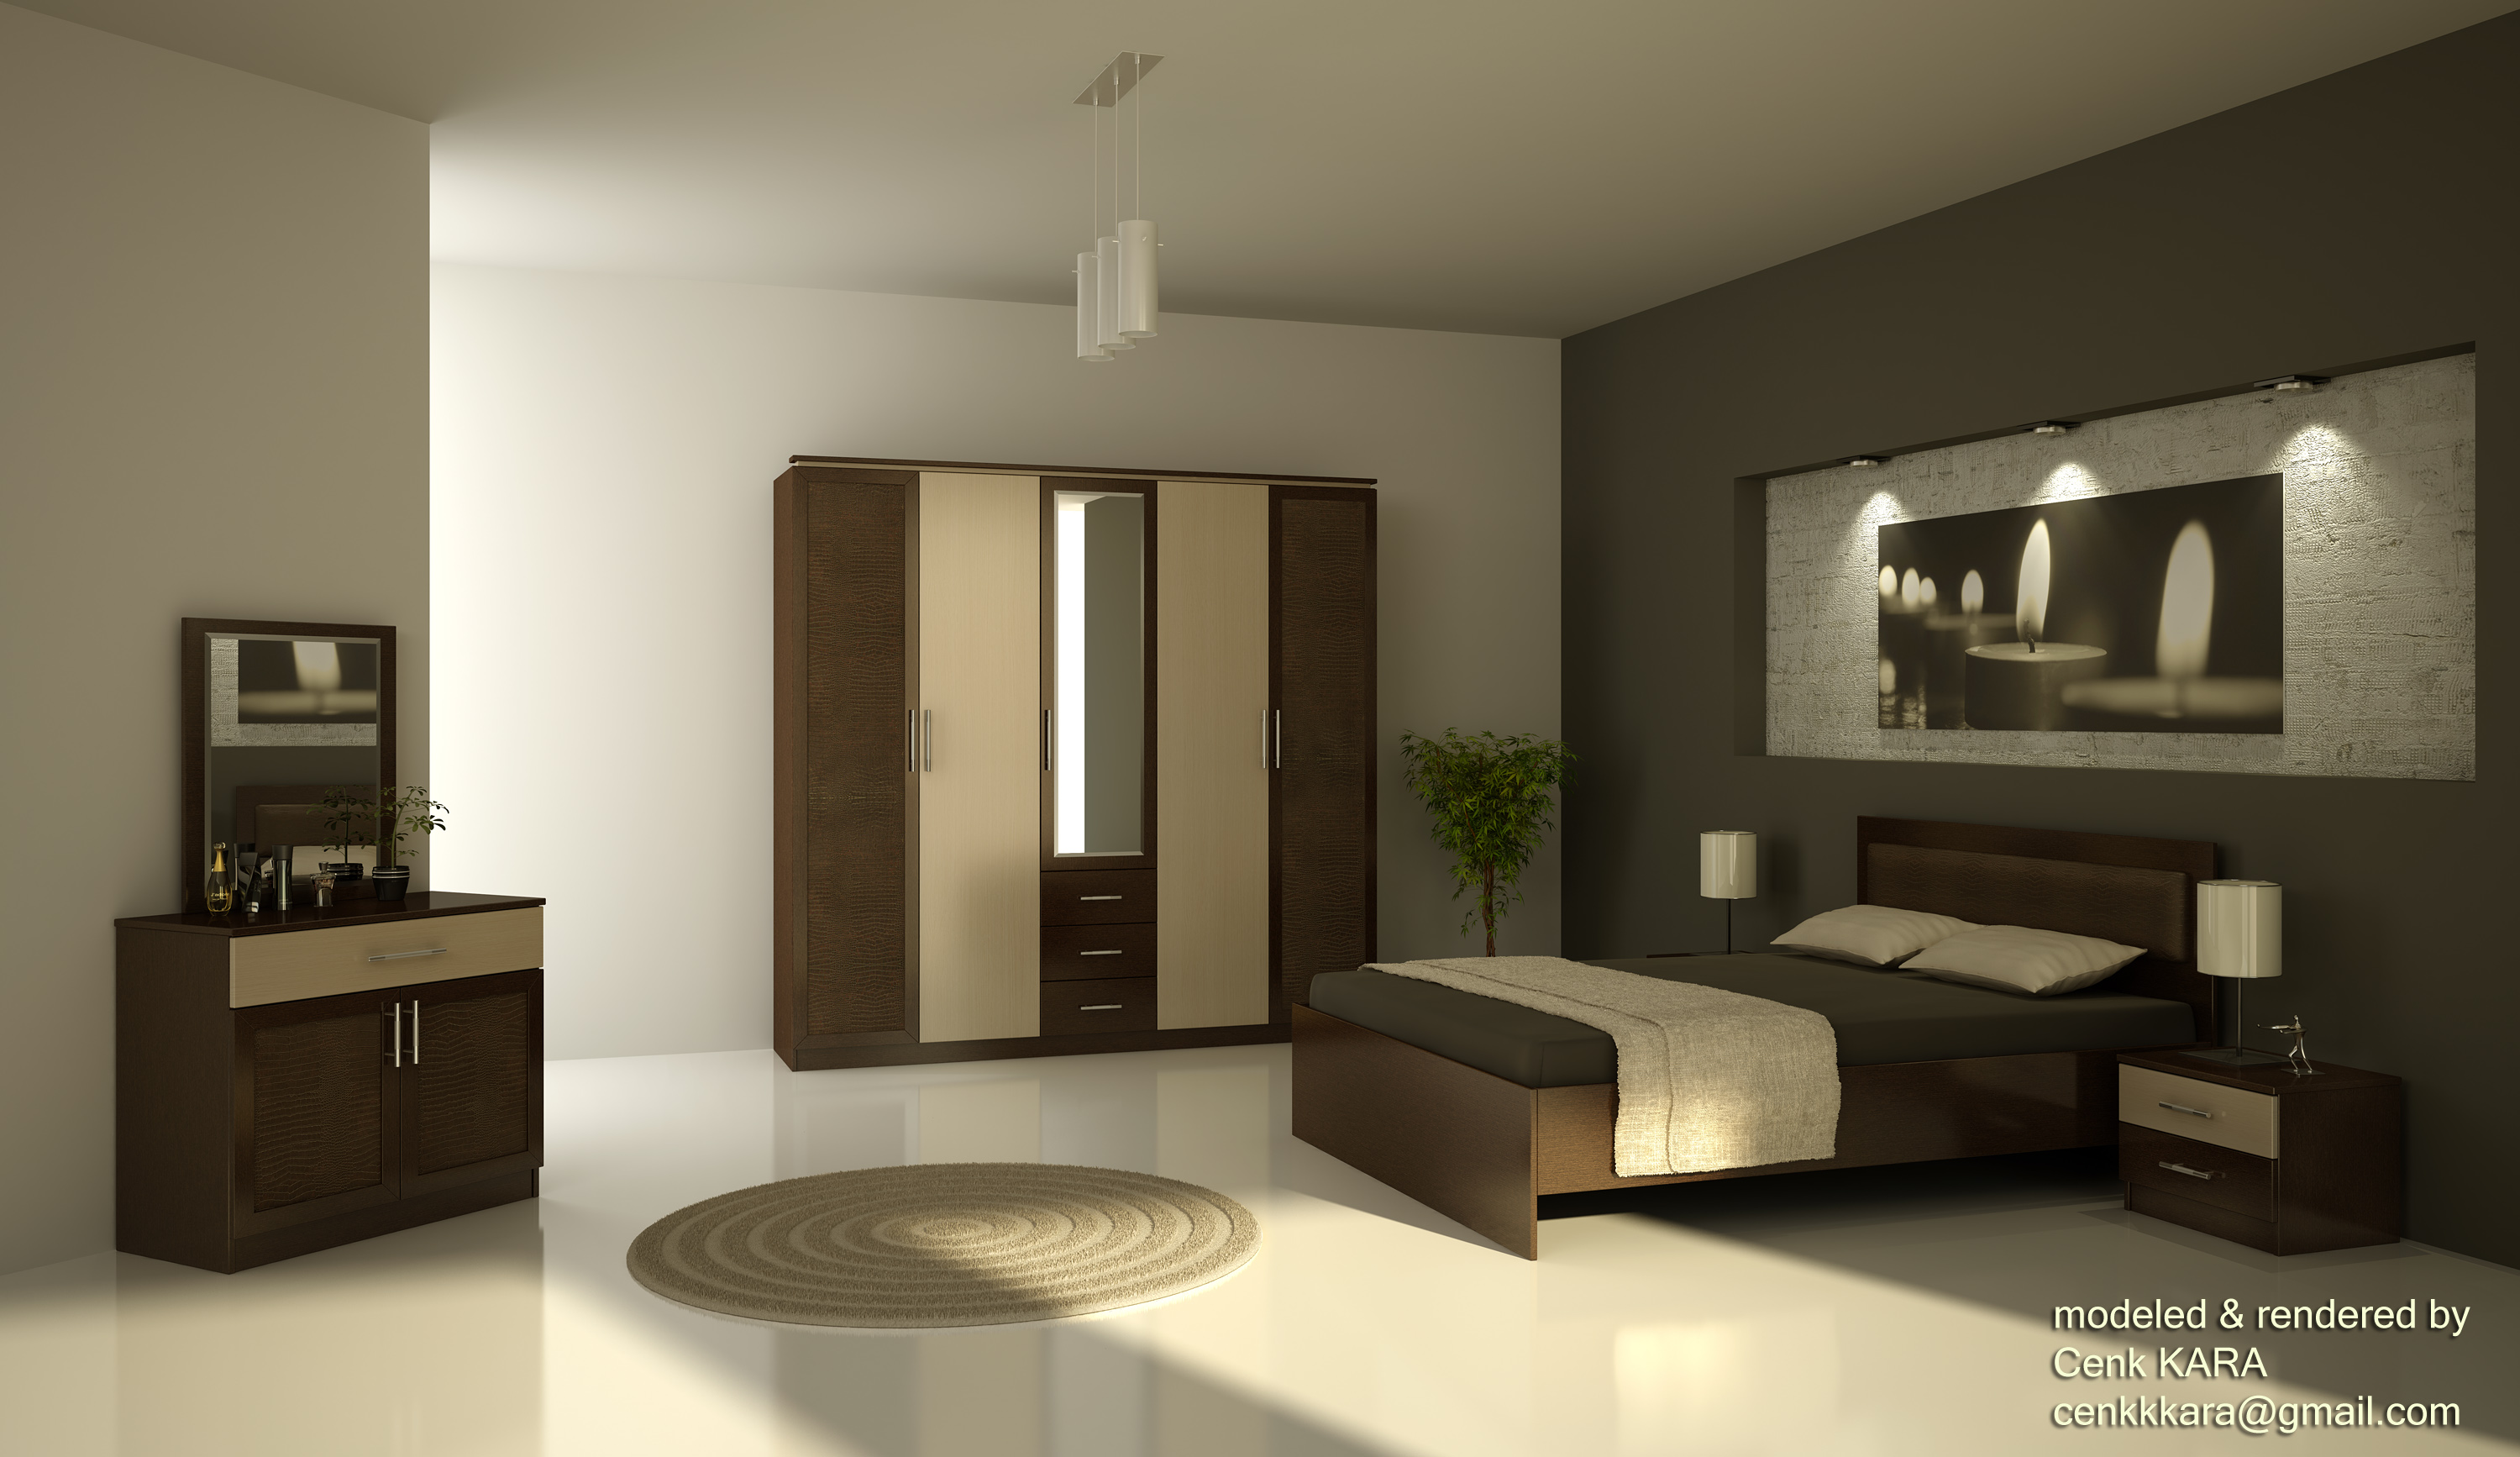 Tips On How To get the Best Cost Effective Bedroom Furniture